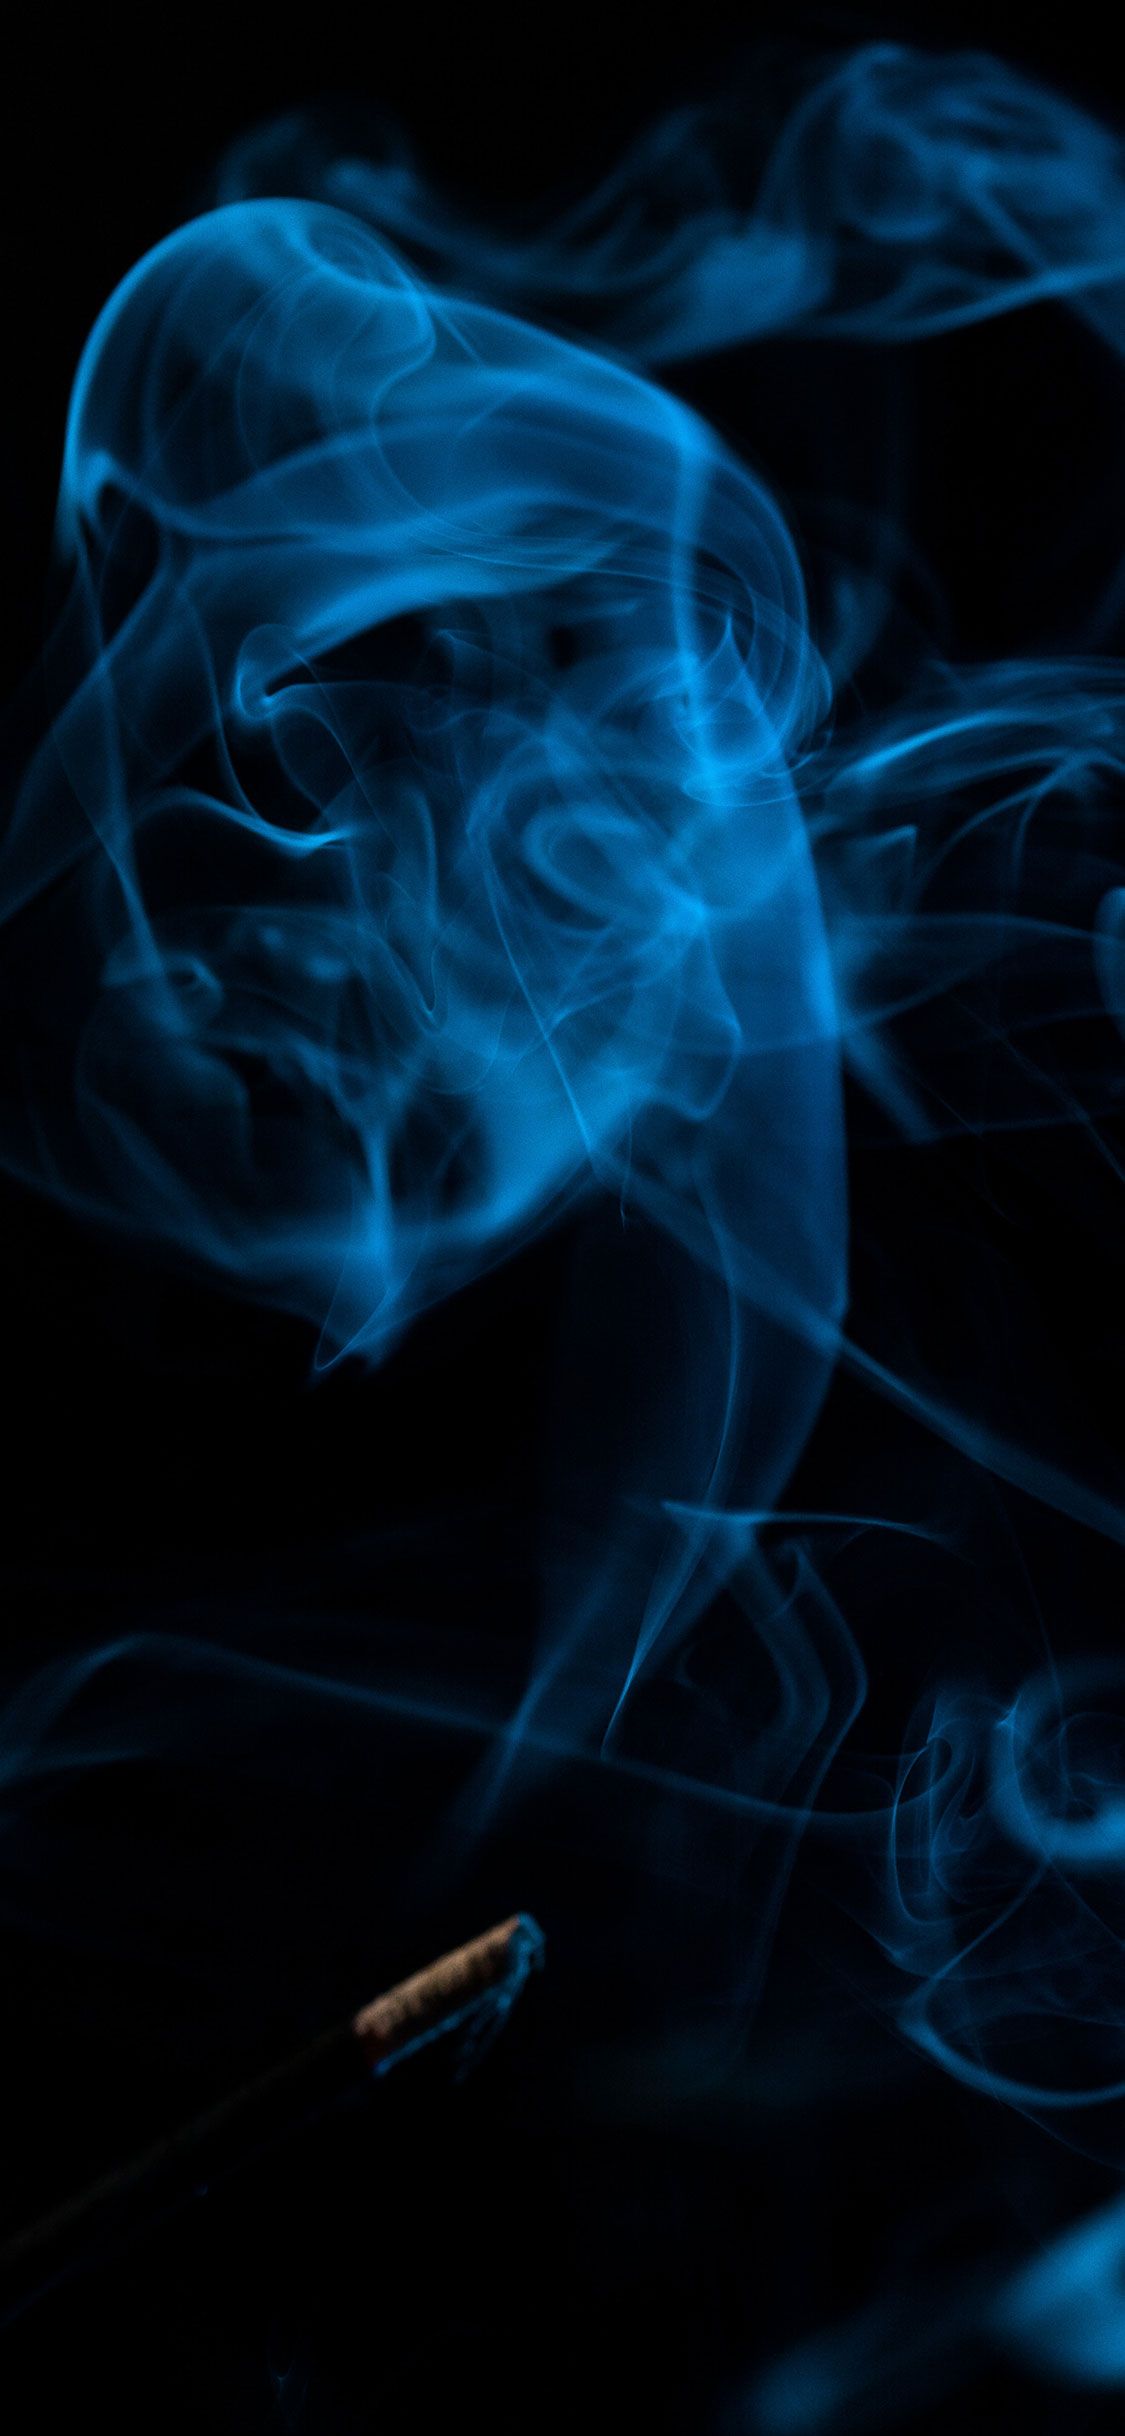 Smoke Wallpaper for iPhone Pro Max, X, 6 Download